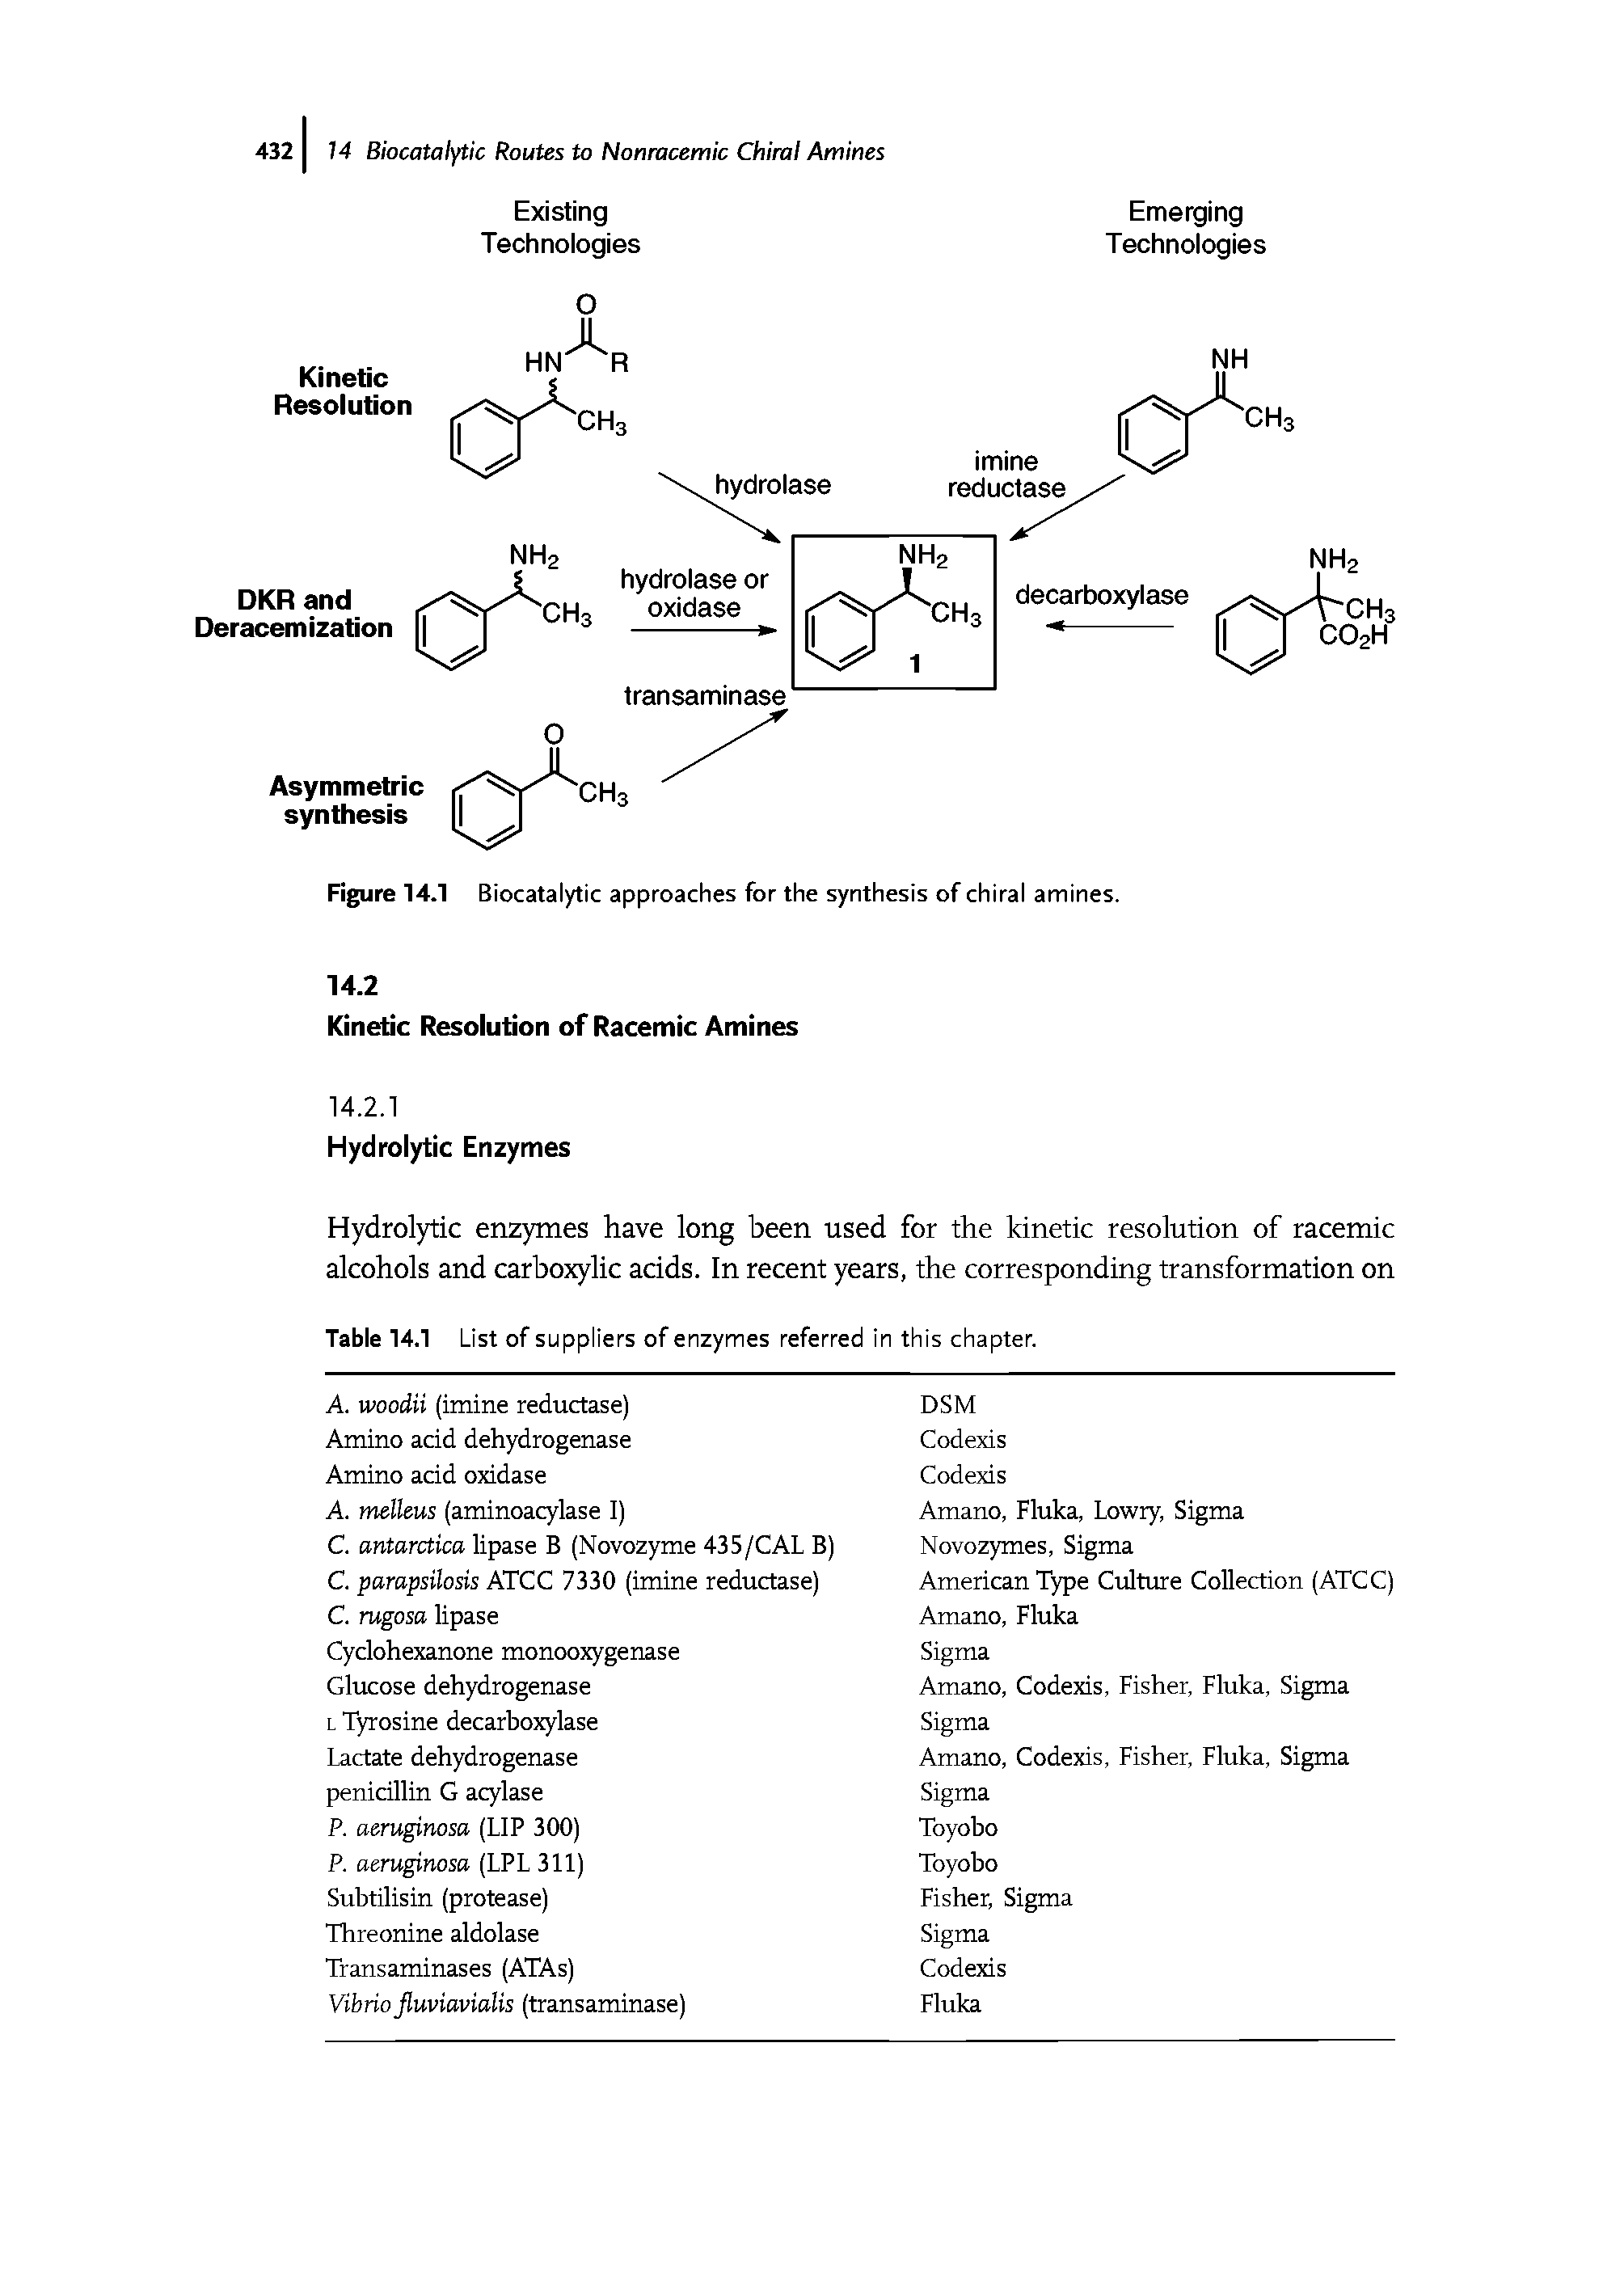 Figure 14.1 Biocatalytic approaches for the synthesis of chiral amines.